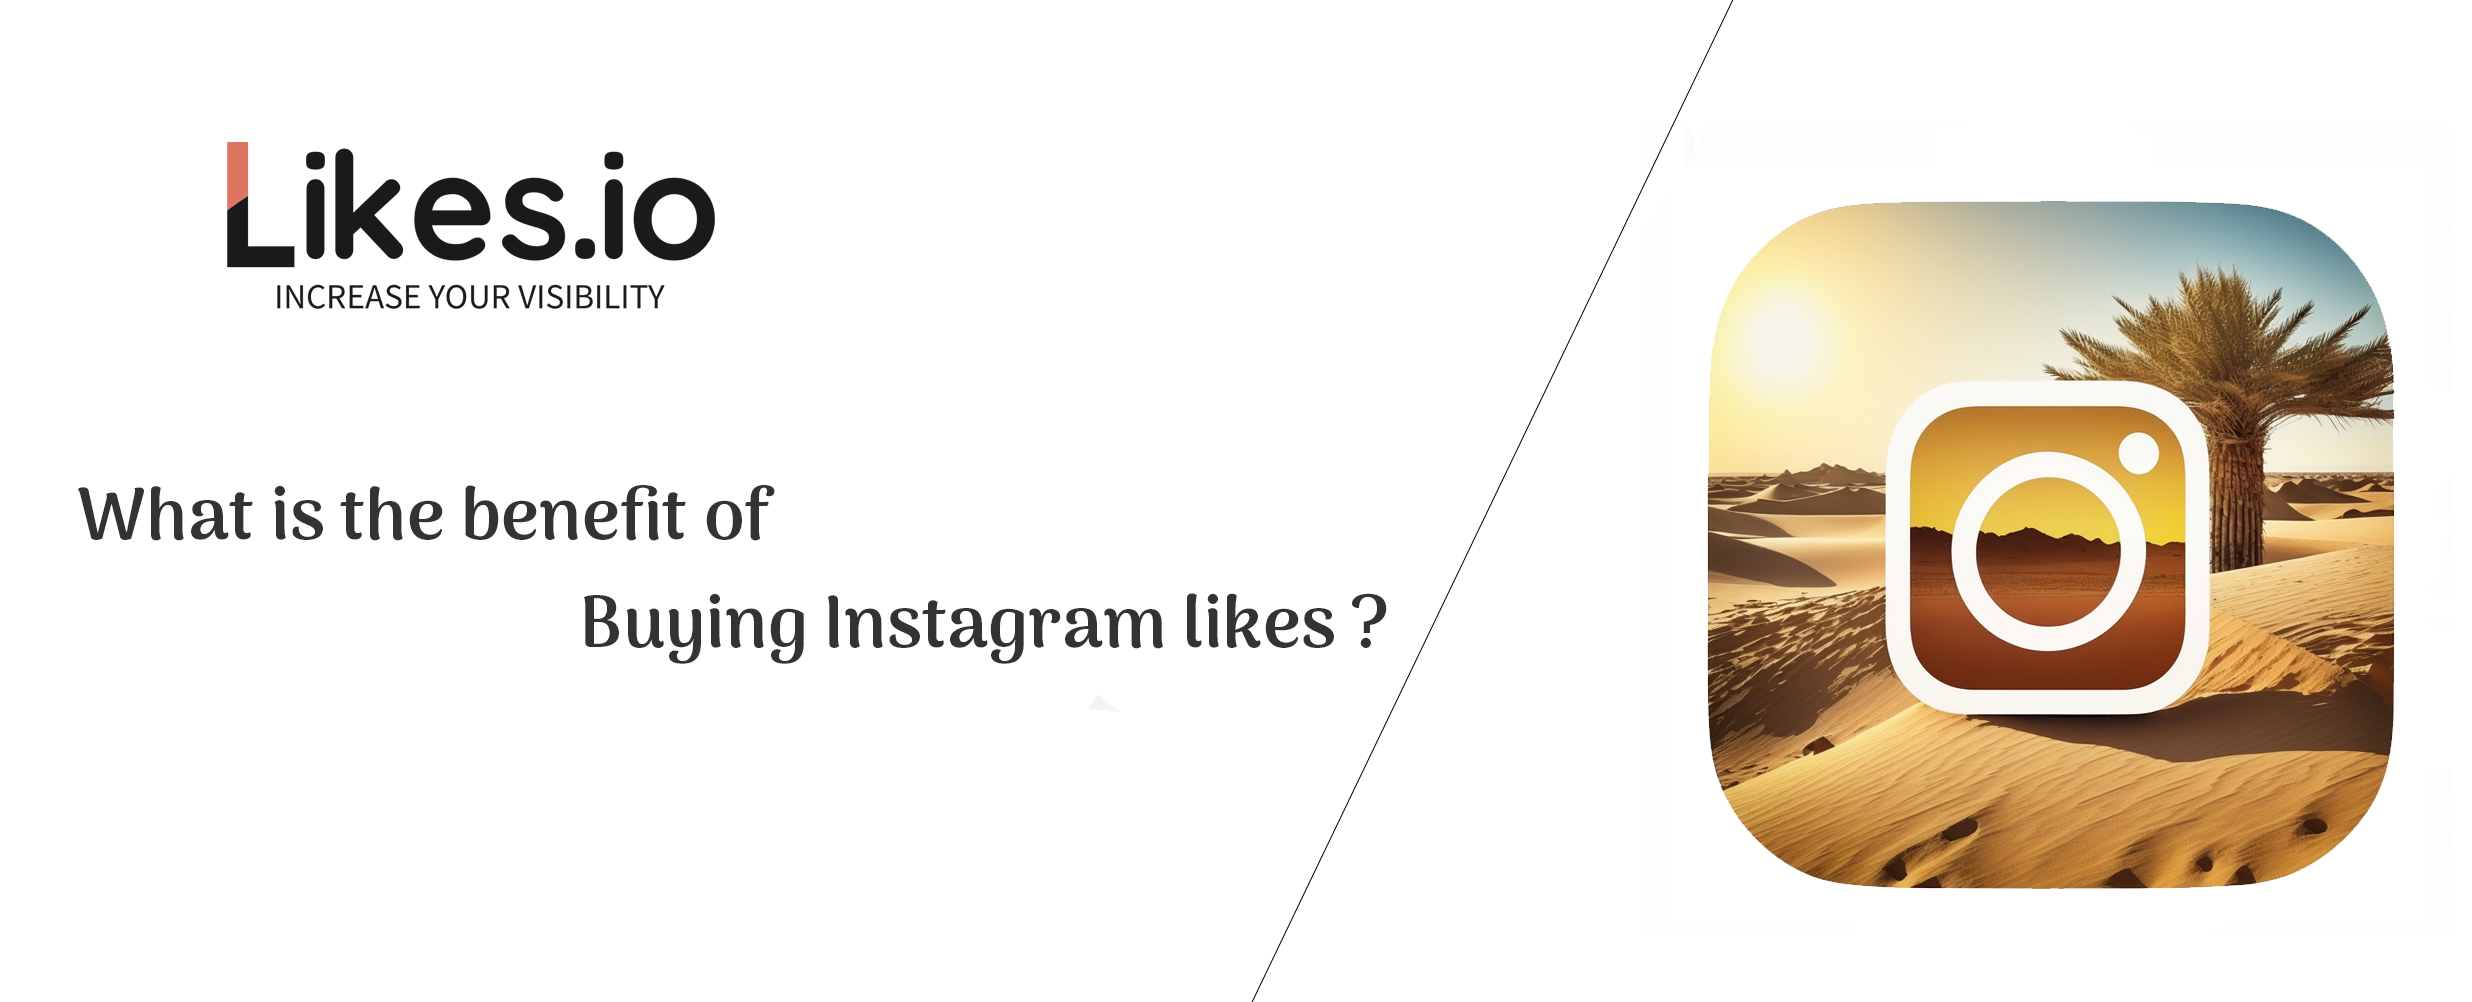 What are the Benefits of Buying Instagram Likes?